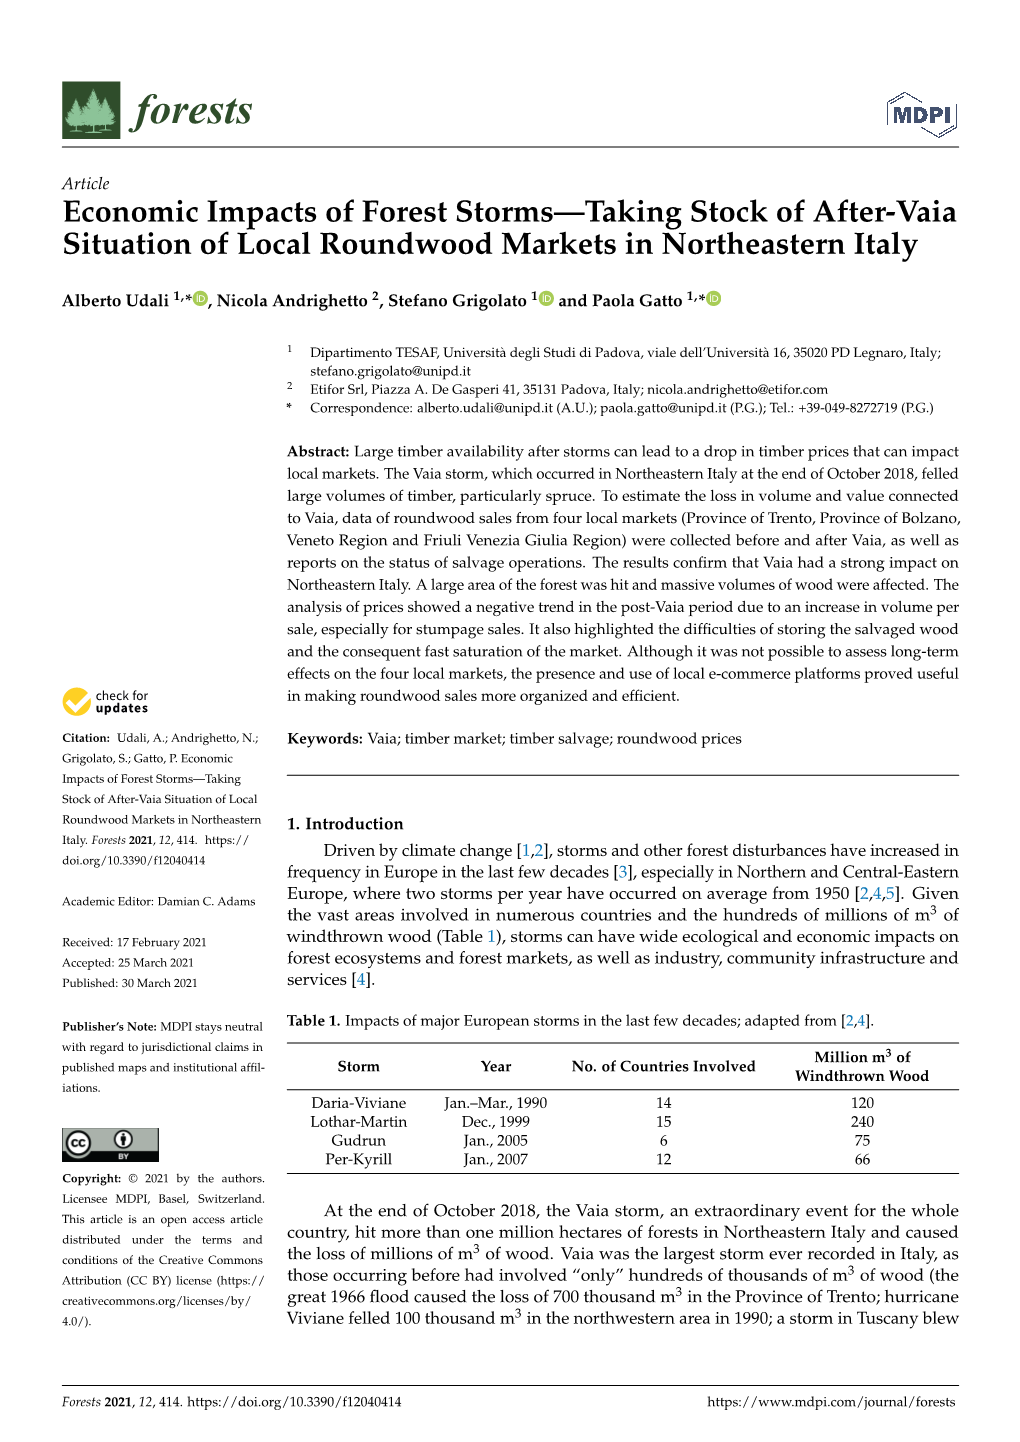 Economic Impacts of Forest Storms—Taking Stock of After-Vaia Situation of Local Roundwood Markets in Northeastern Italy